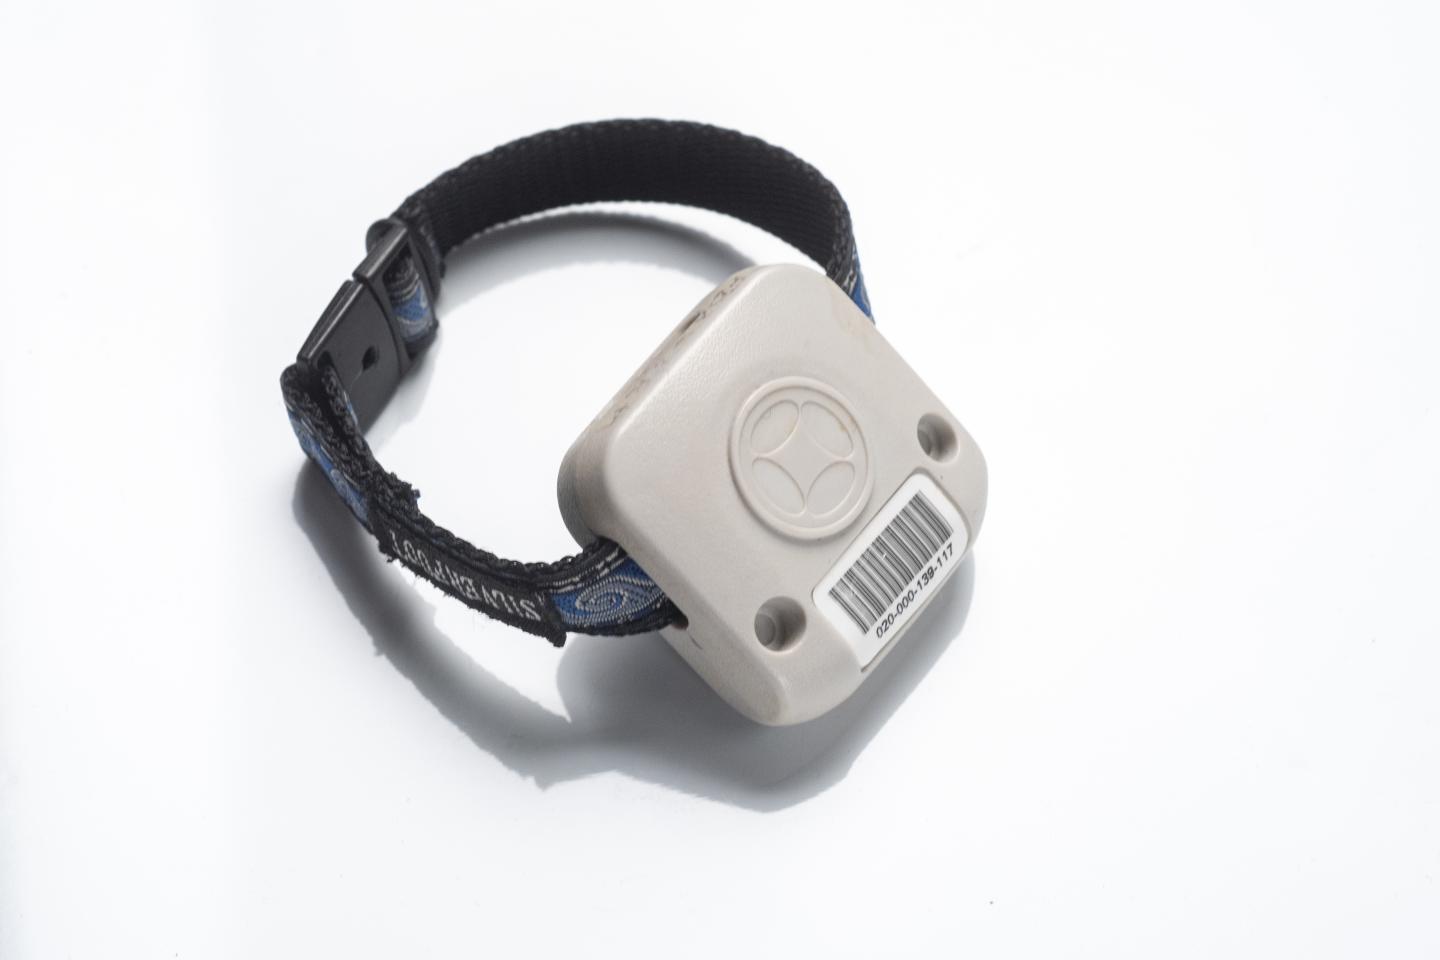 Wristband Connected to Real Time Location System (RTLS) Sensor Network